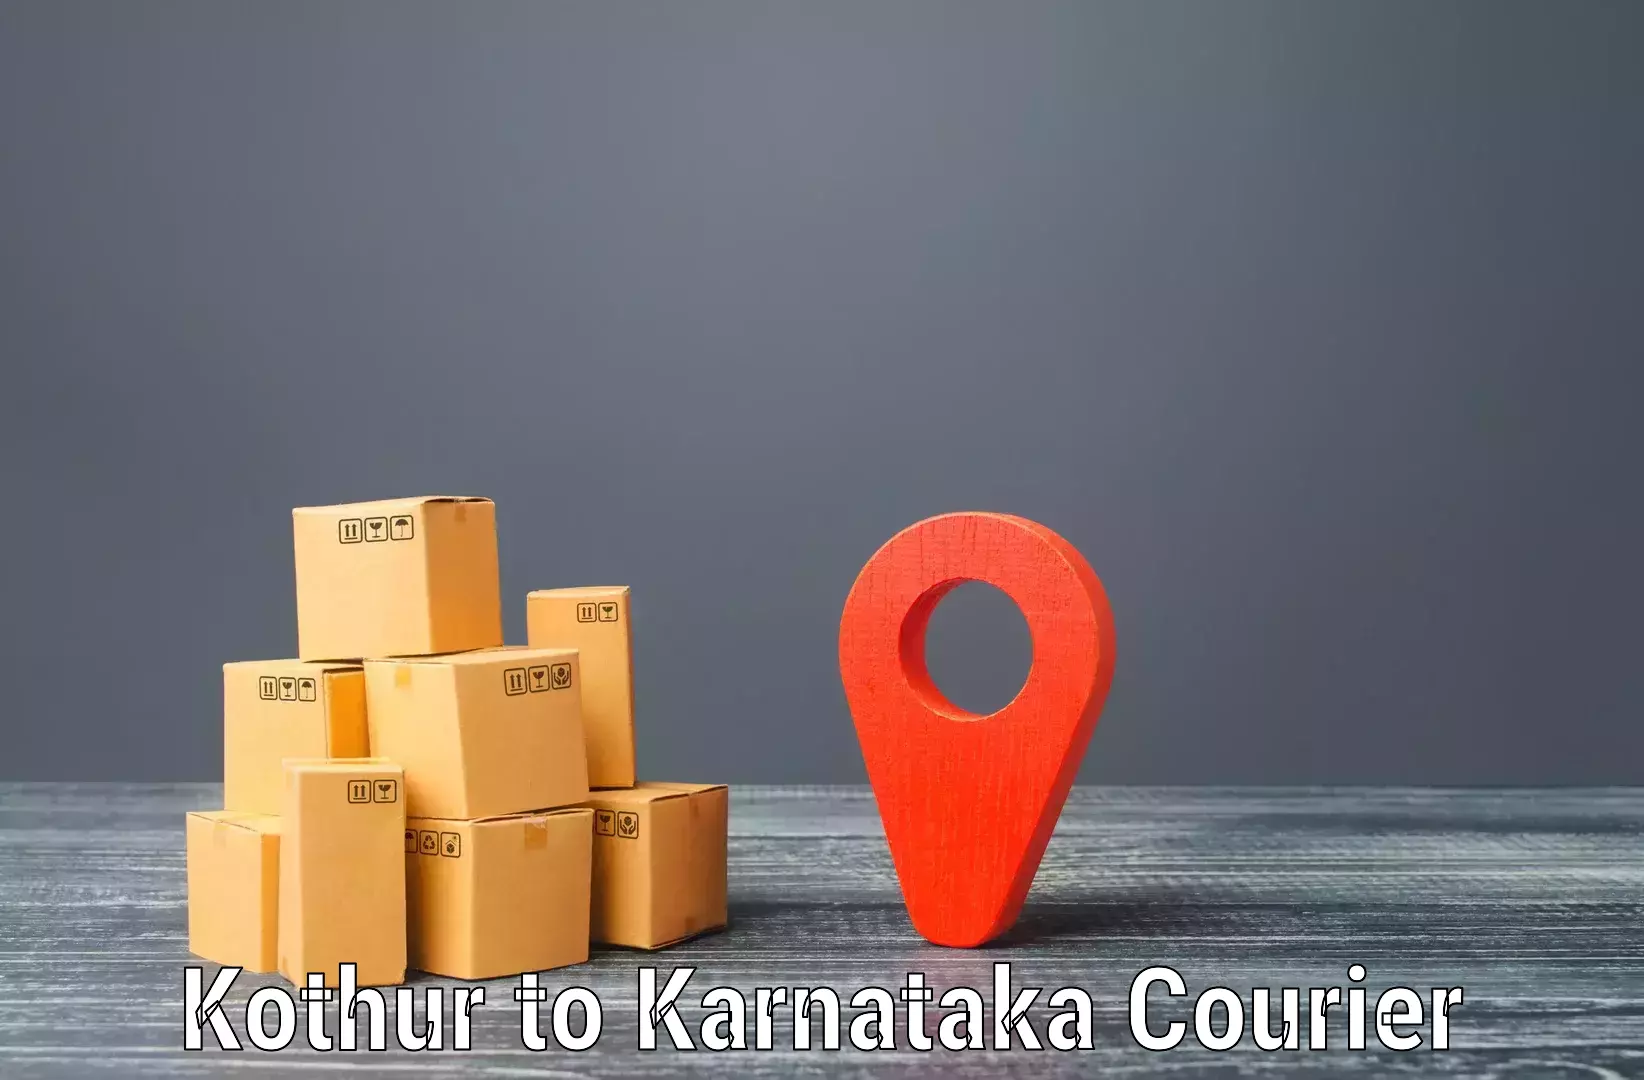 Customized shipping options in Kothur to Nanjangud